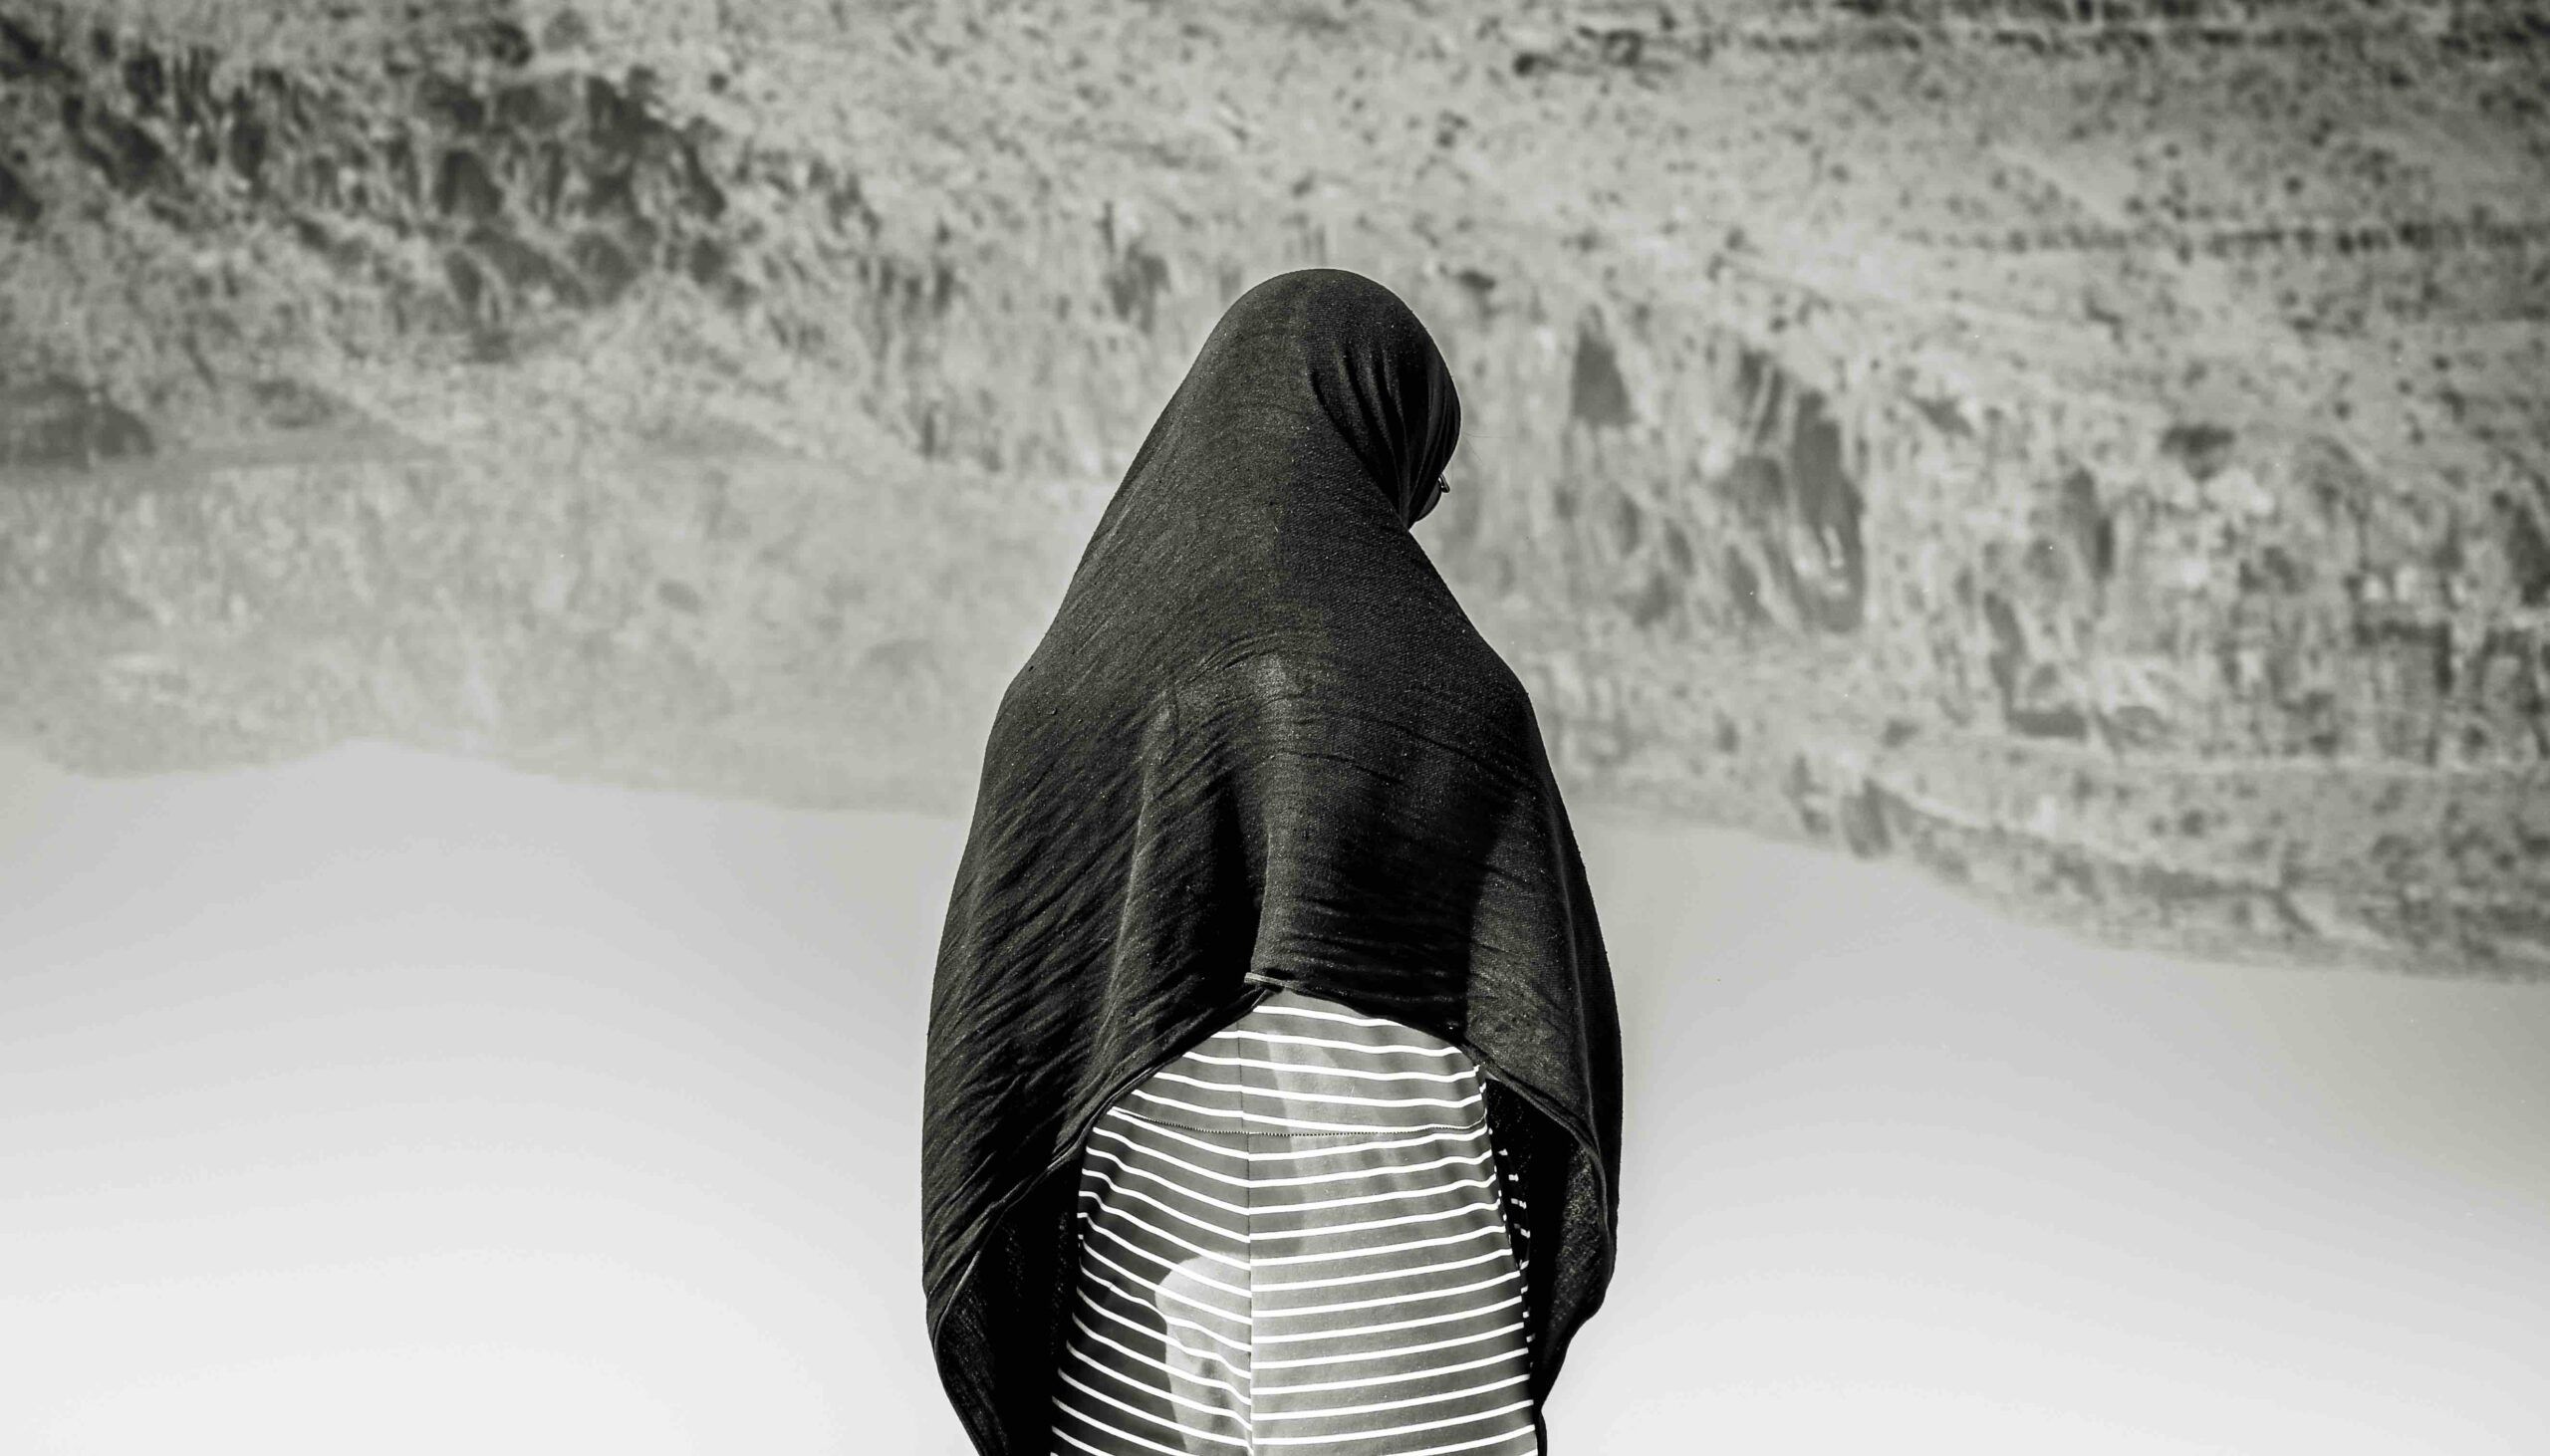 Black and white photo: back view of a woman wearing a hijab standing alone looking at a lake